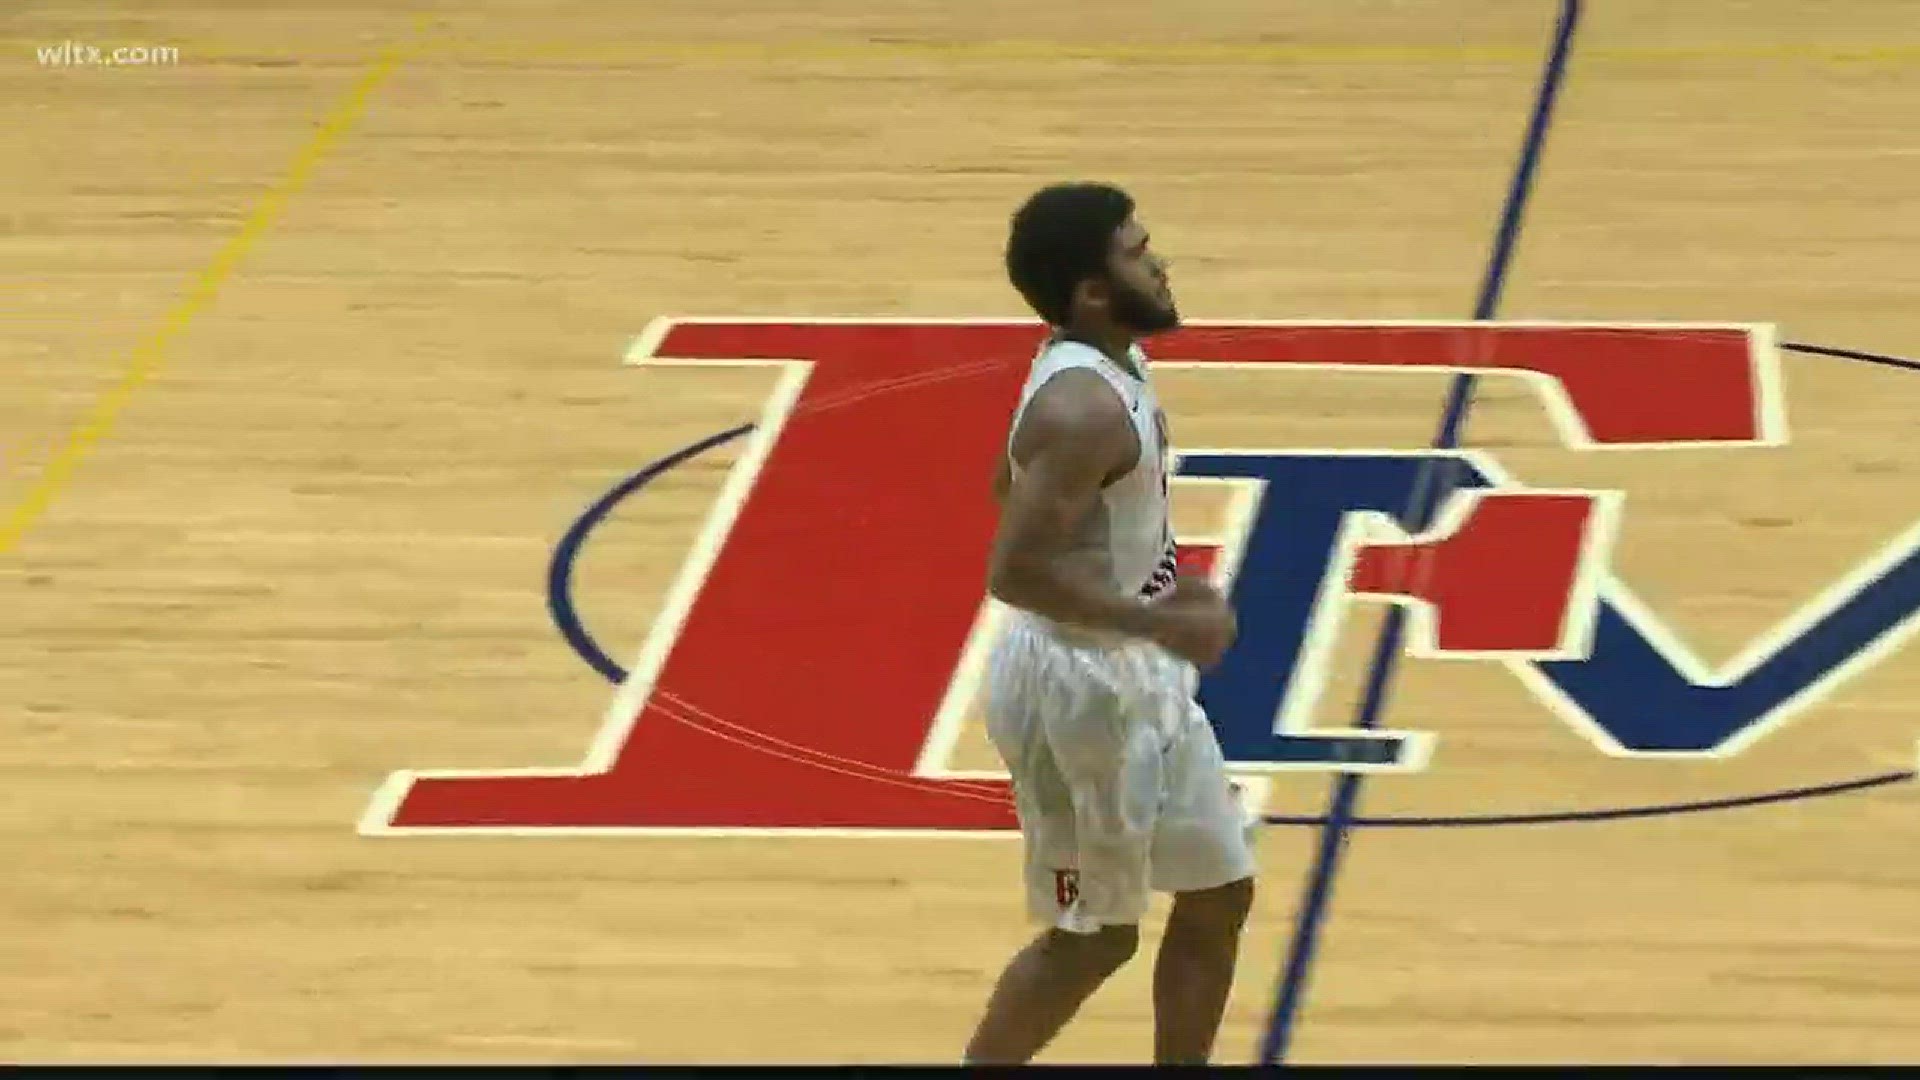 Irmo native Detrek Browning will end his career at Francis Marion as the program's most decorated player.